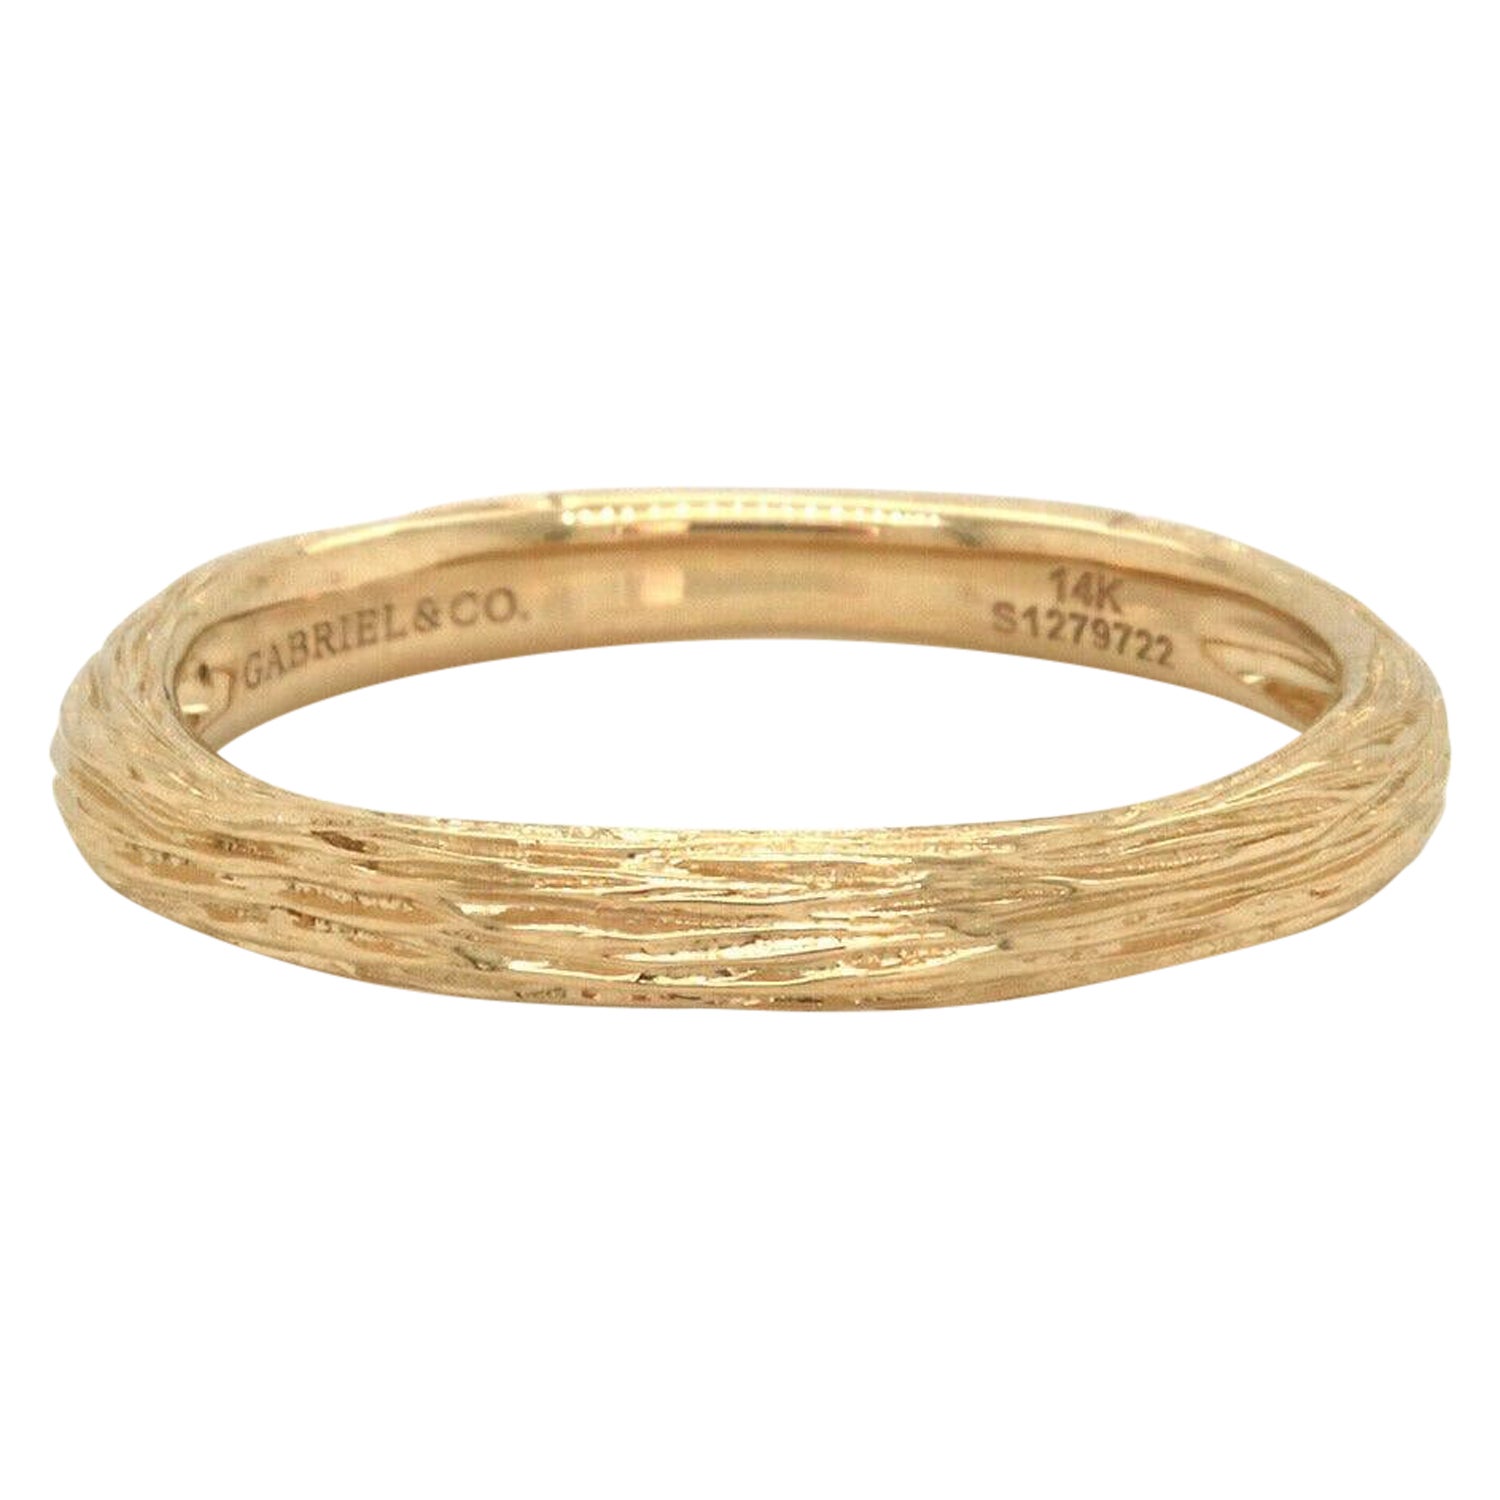 New Gabriel & Co. Textured Band Ring in 14K Yellow Gold For Sale